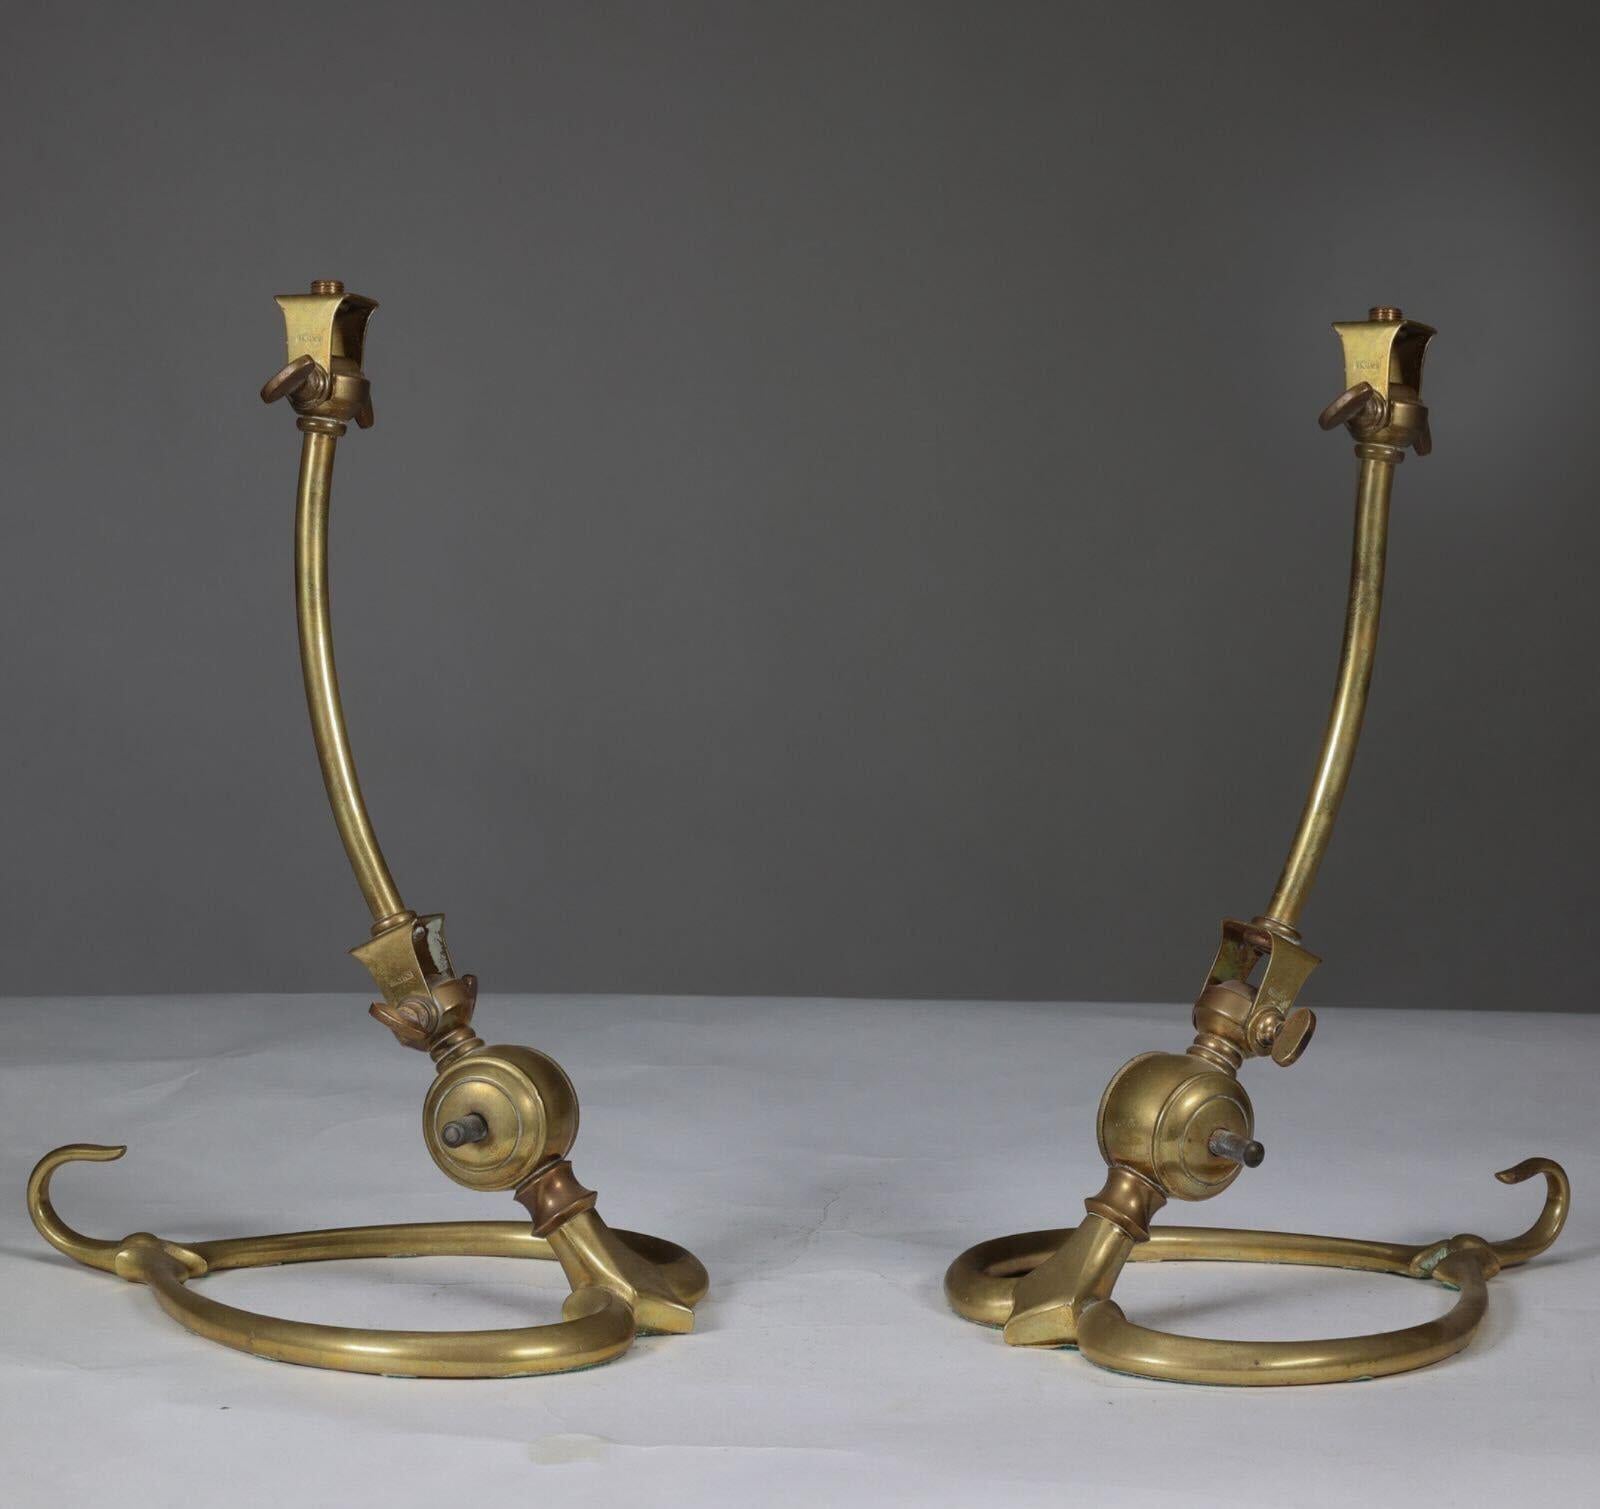 WAS Benson. A pair of Arts & Crafts brass table lamps with heart shaped bases & original switches. WAS Benson Catalogue plate 15, illustration No 1139. Photographed here as the standard option but can also be used as bracket as seen on the catalog.